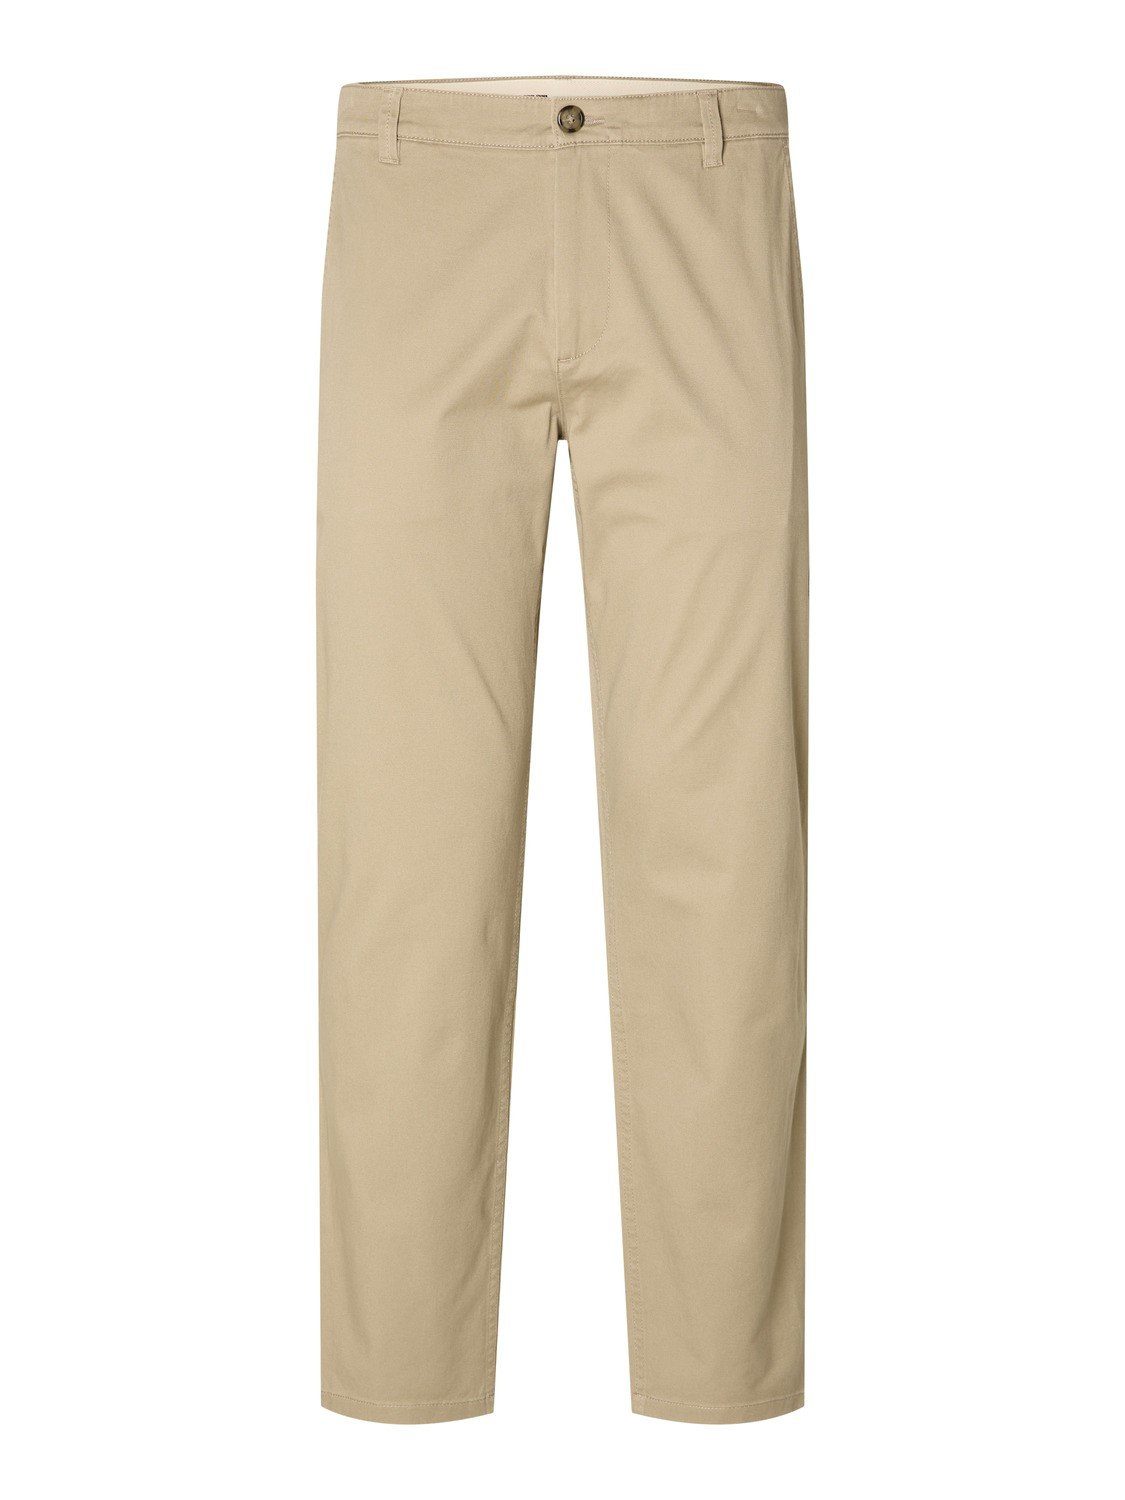 SELECTED HOMME Chinohose SLH175-SLIM BILL mit Stretch